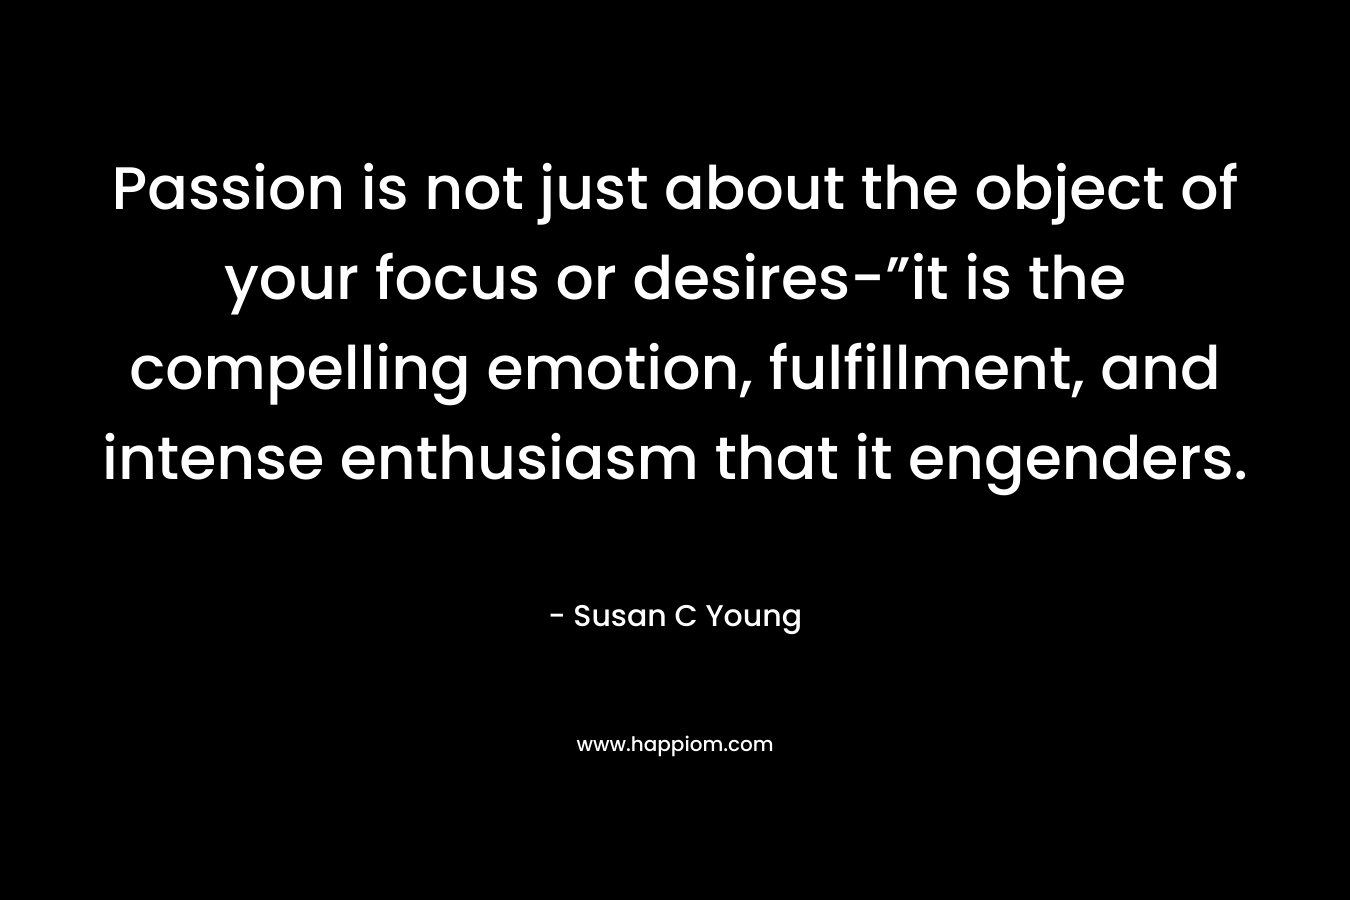 Passion is not just about the object of your focus or desires-”it is the compelling emotion, fulfillment, and intense enthusiasm that it engenders.